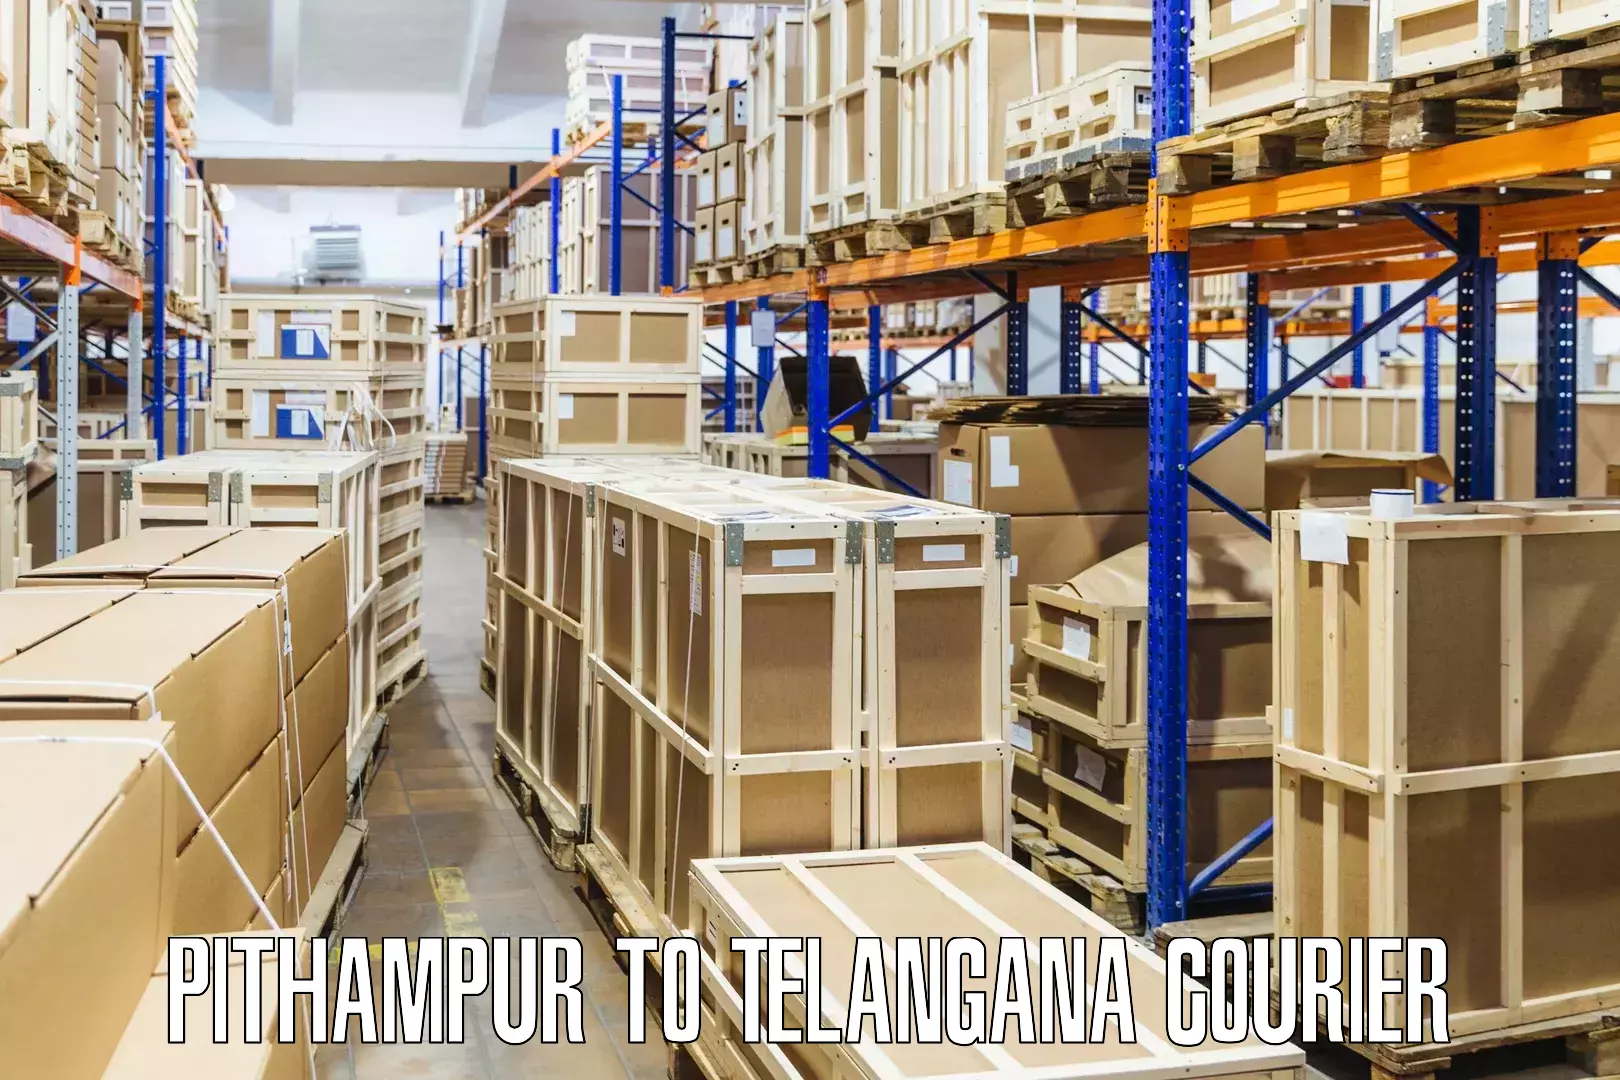 Ocean freight courier Pithampur to Bhupalpally